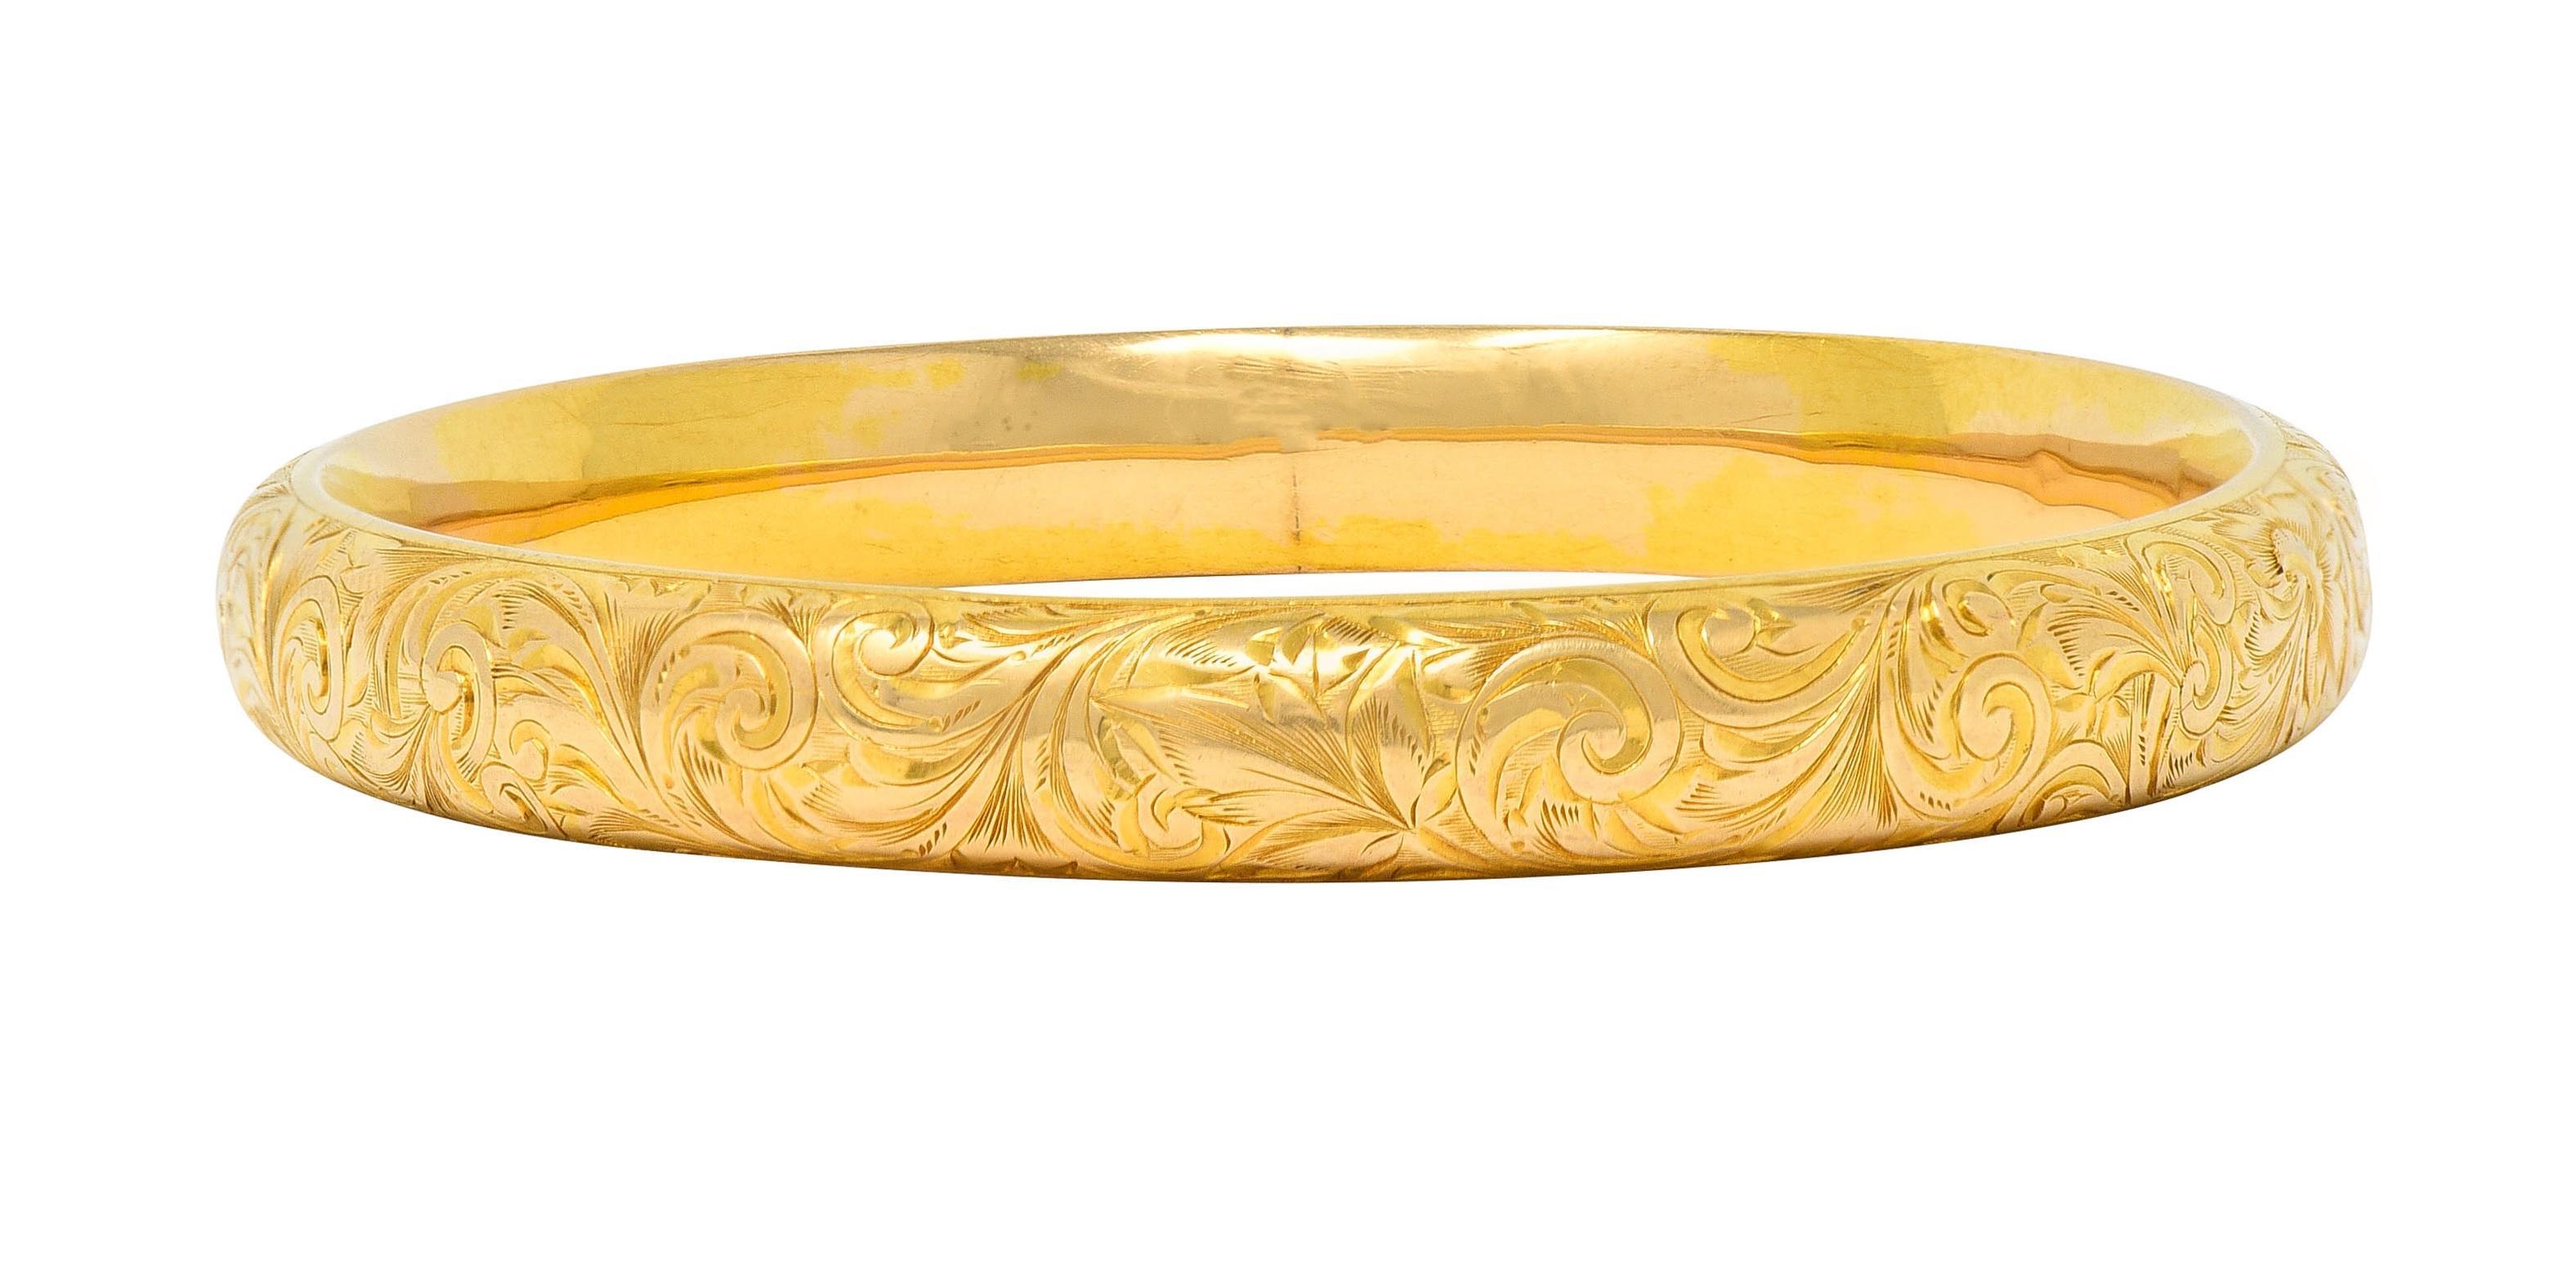 Designed as an oval-shaped bangle with a curved surface
Engraved with an ornate scroll motif throughout
With floral motifs and linear texture
Tested as 14 karat gold
With partial maker's mark for Riker Brothers
Circa: 1900
Width: 5/16 inch
Bracelet